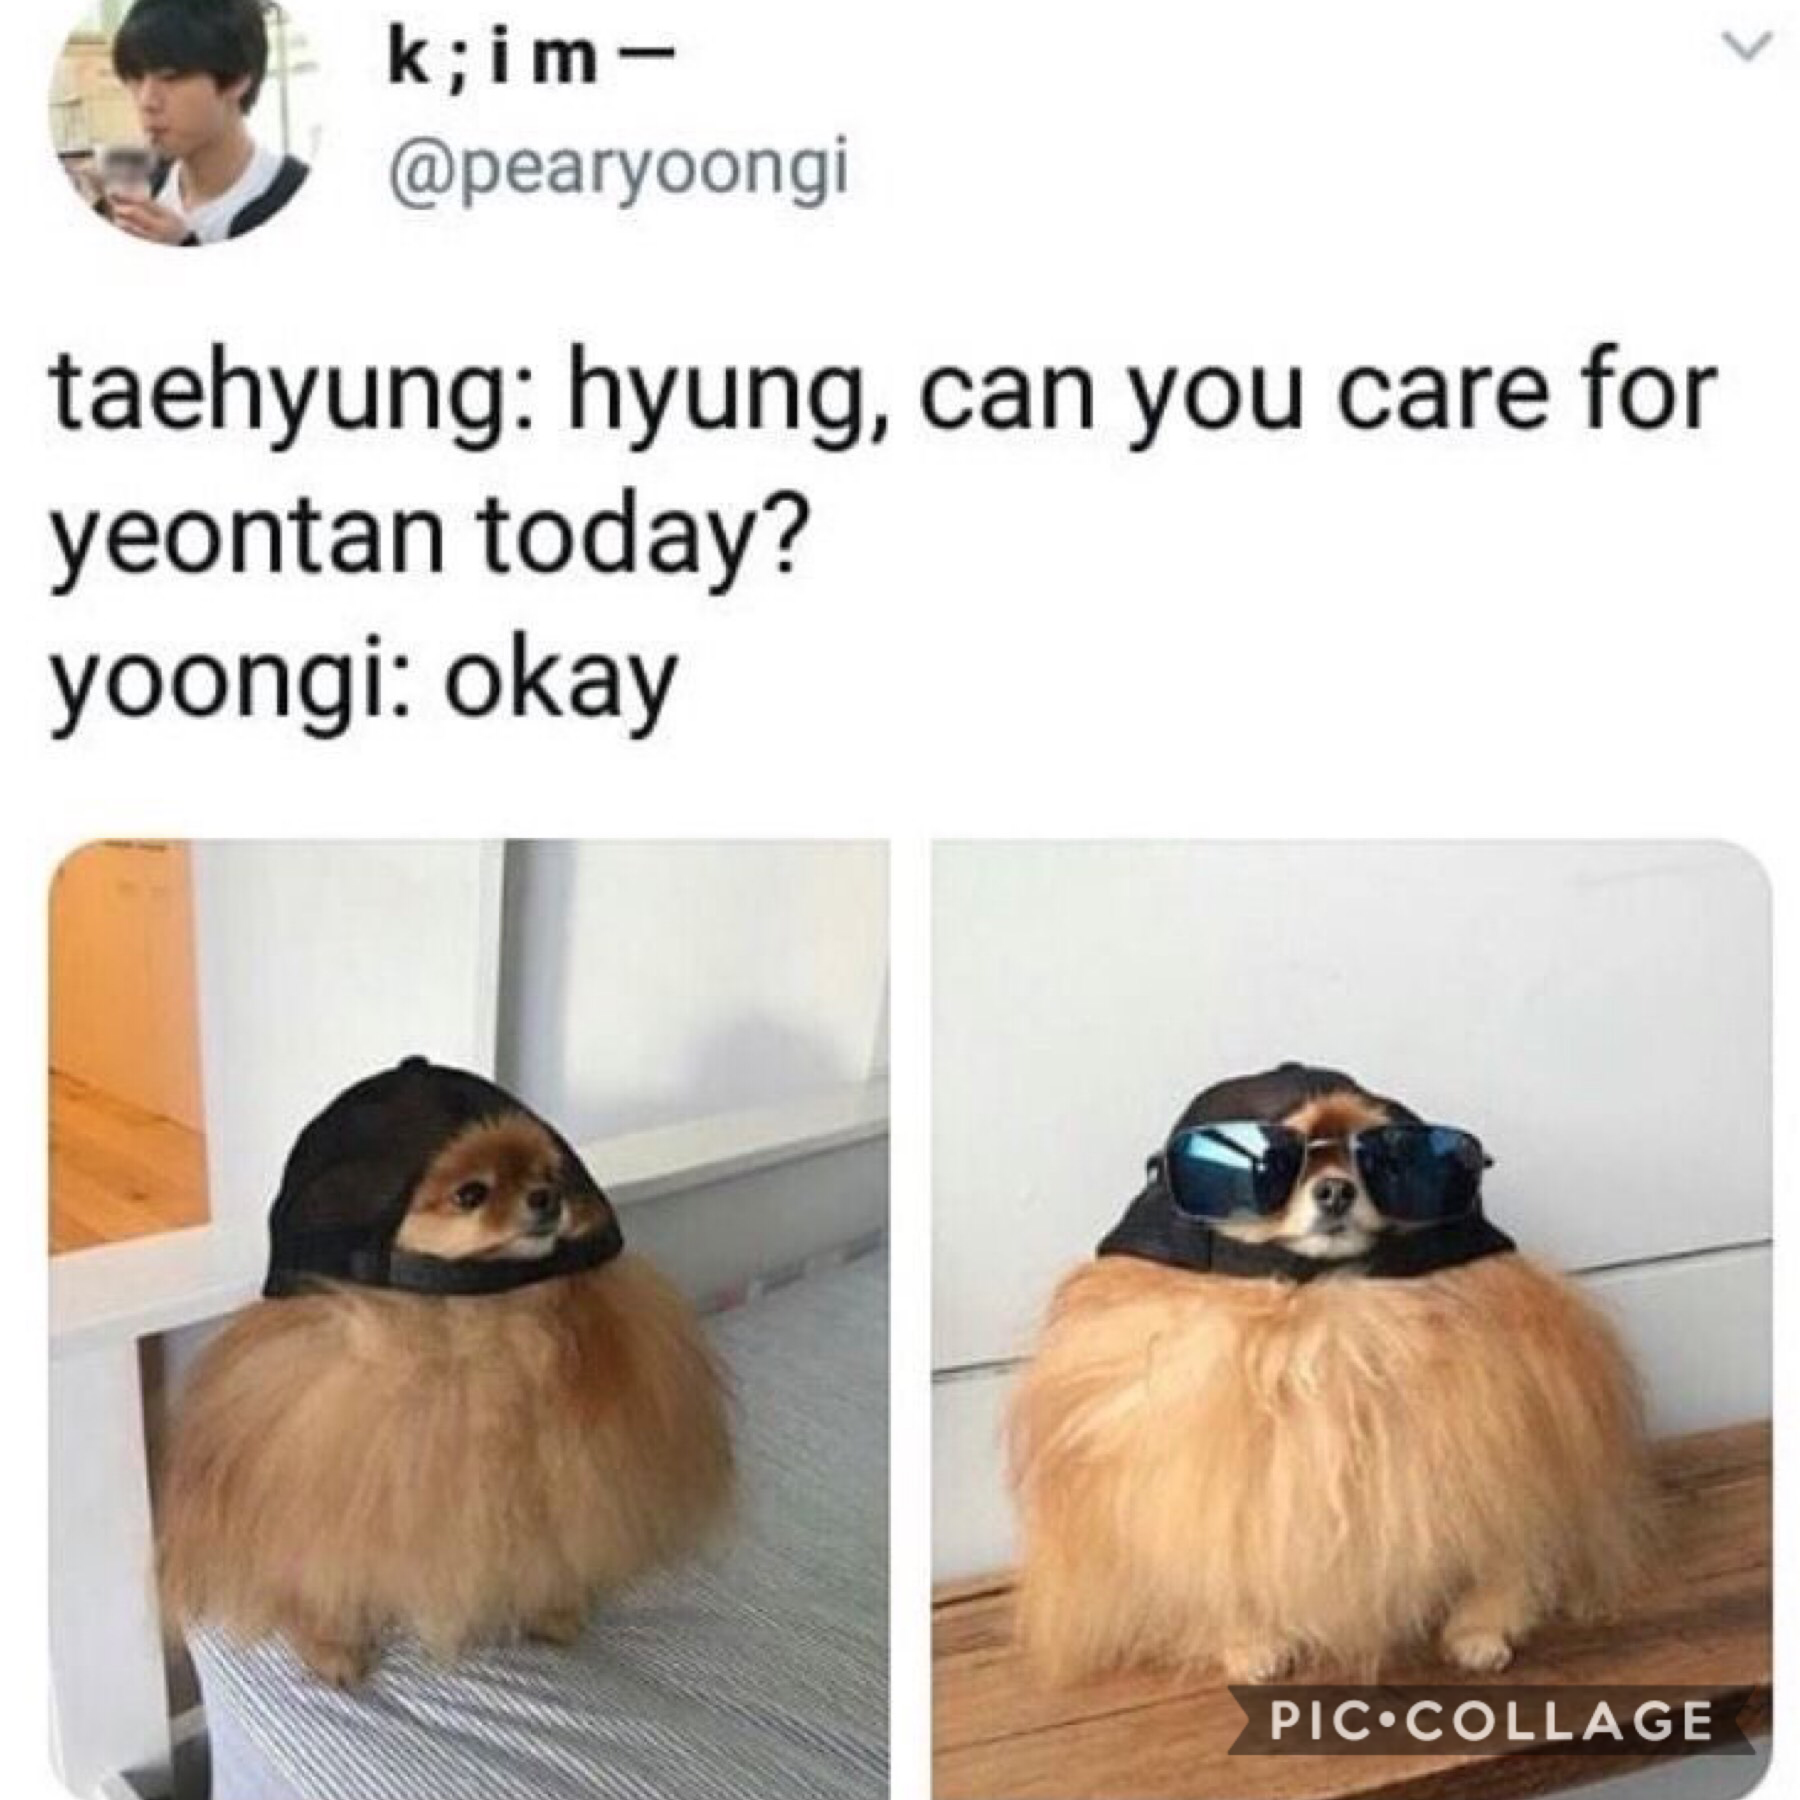 yEoNTaN iS So sWaGgy